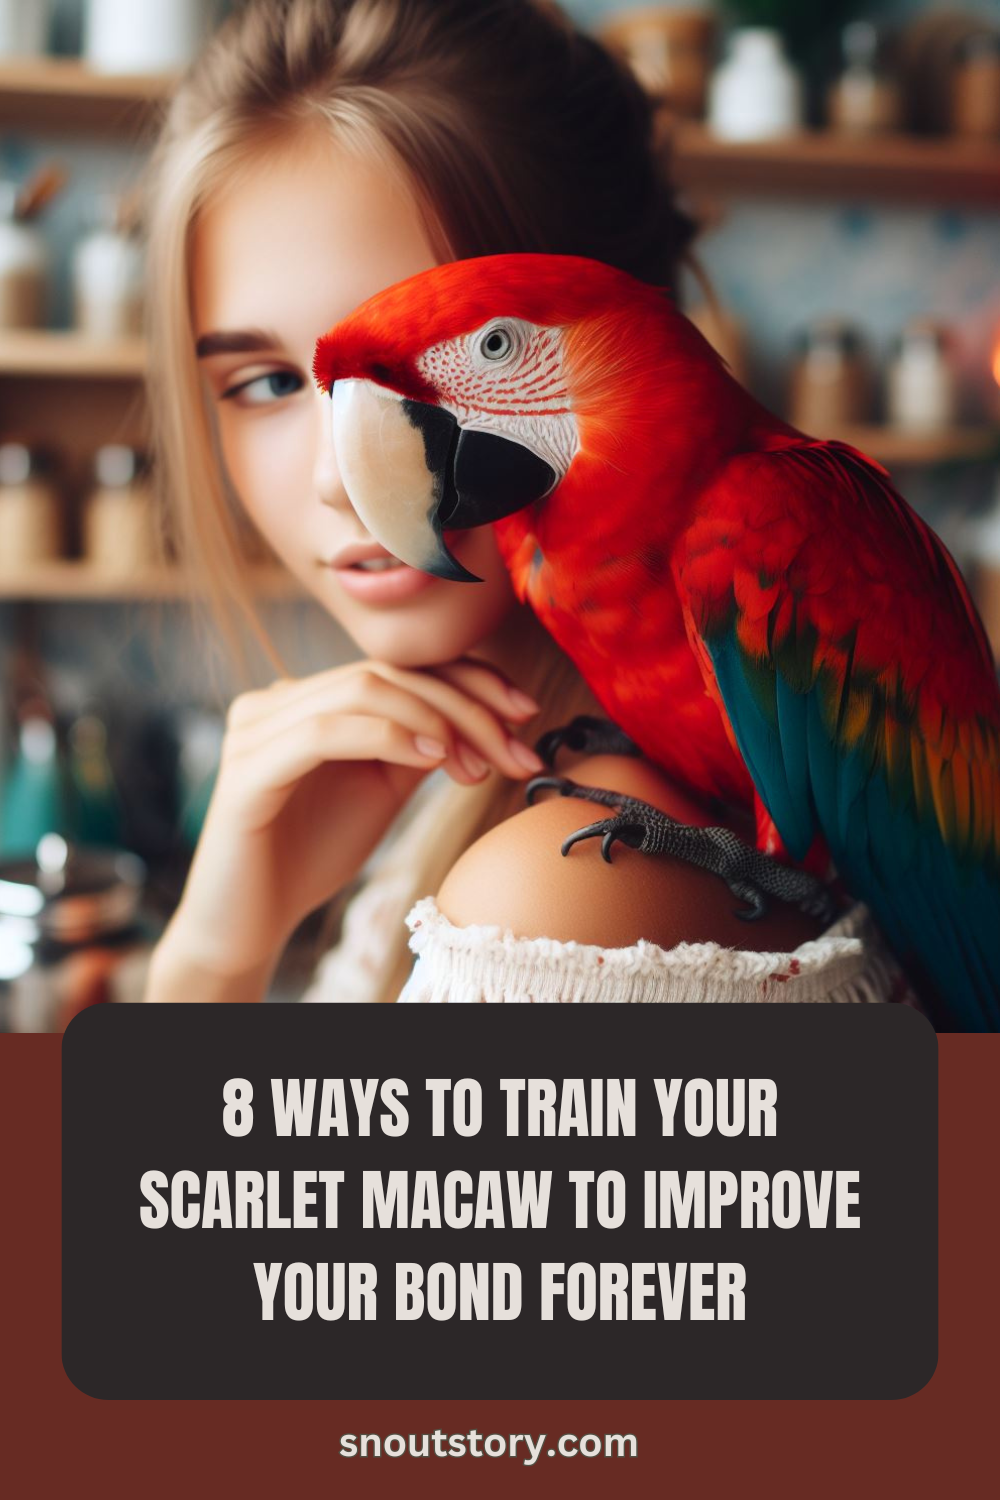 8 Easy Training Techniques for Your Scarlet Macaw (Build An Unbreakable Bond)